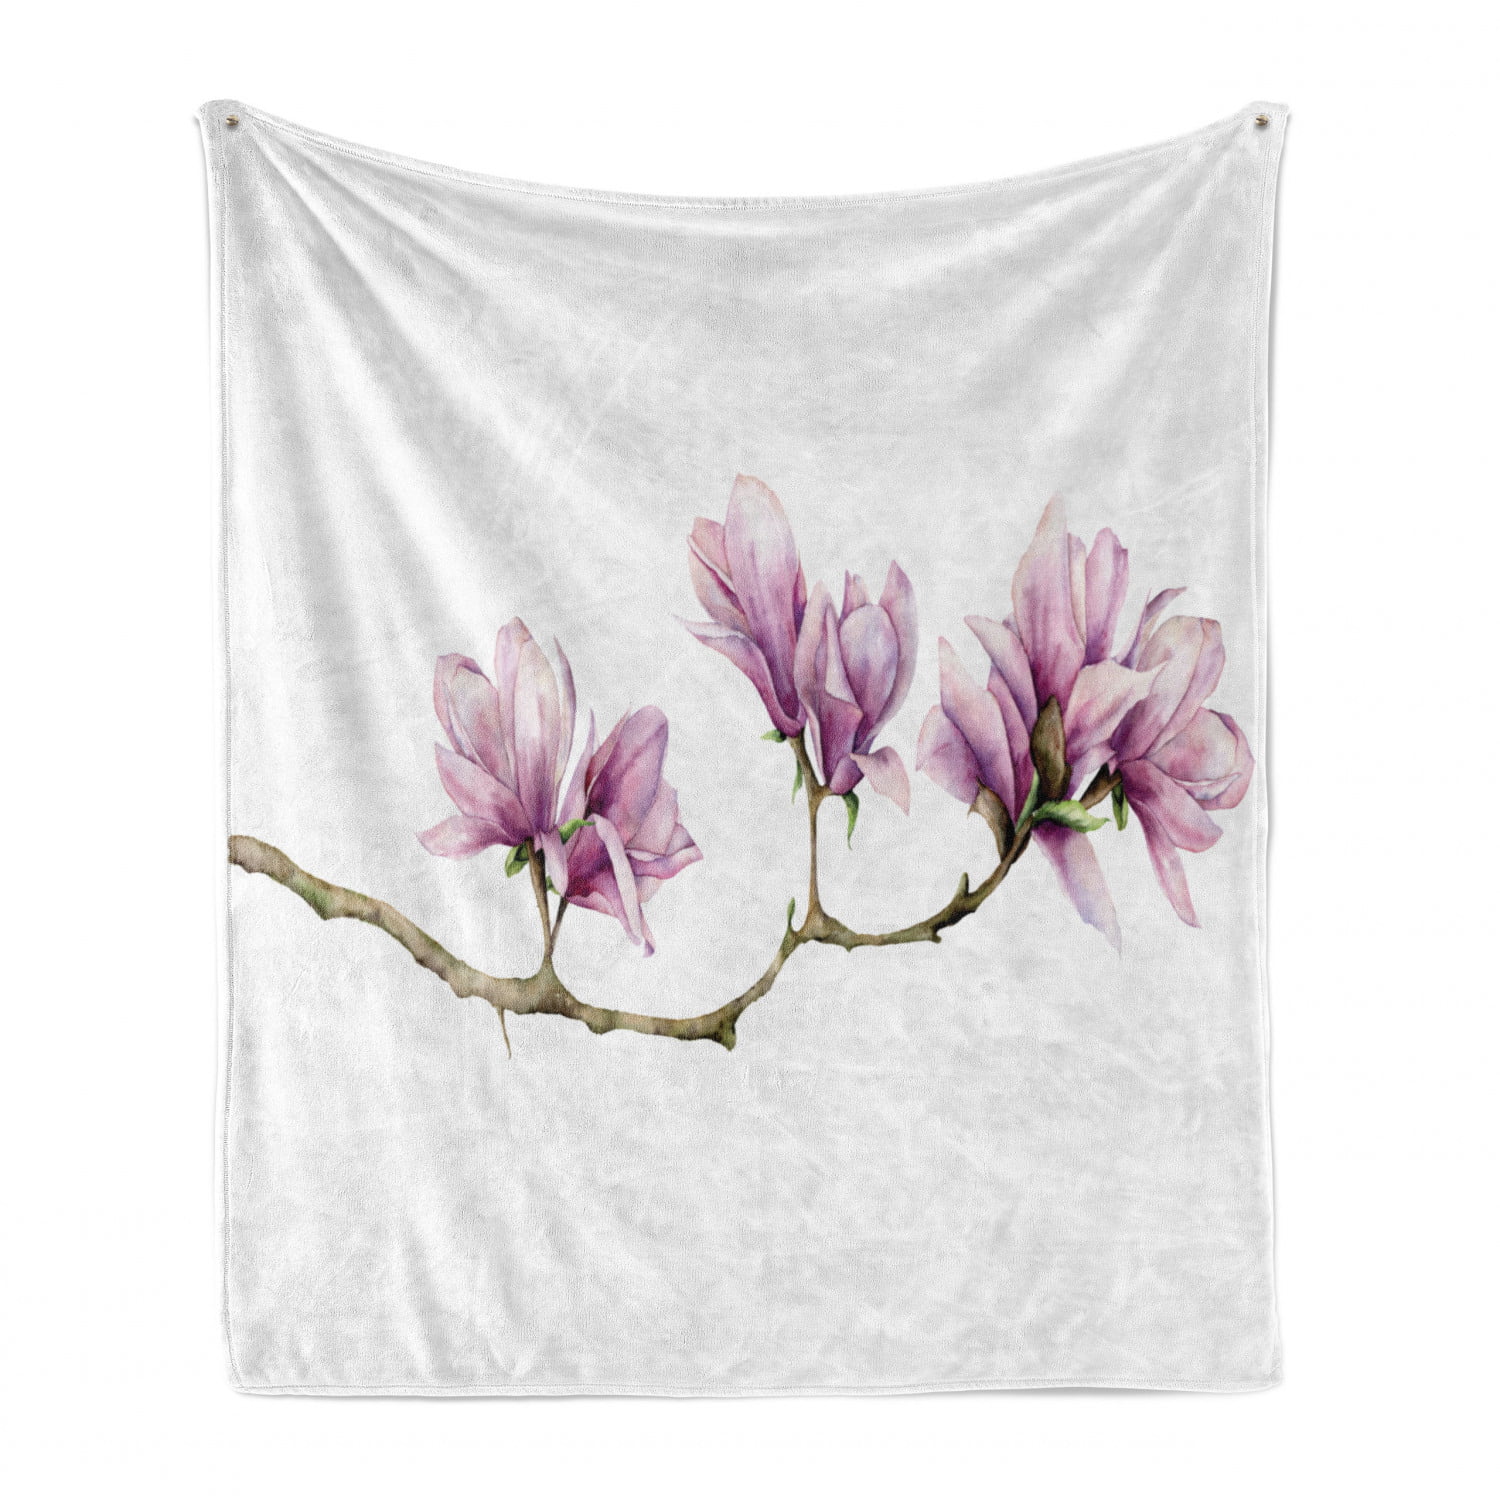 Cozy Plush for Indoor and Outdoor Use Pale Fuchsia Multicolor Ambesonne Floral Soft Flannel Fleece Throw Blanket 70 x 90 Watercolor Style Painting Illustration of a Magnolia Flower on a Branch